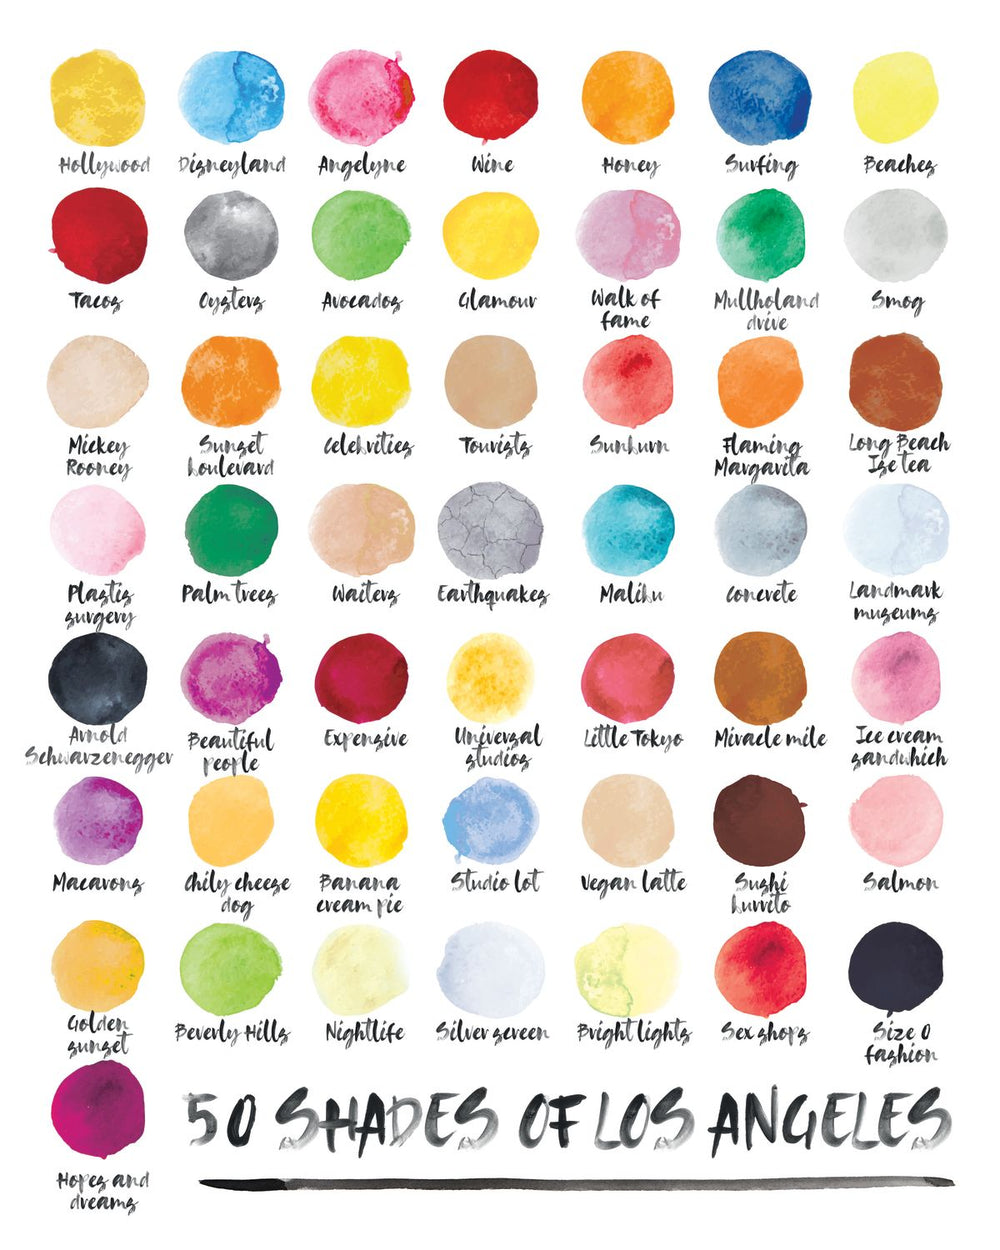 Shades Of Los Angeles Guide Chart